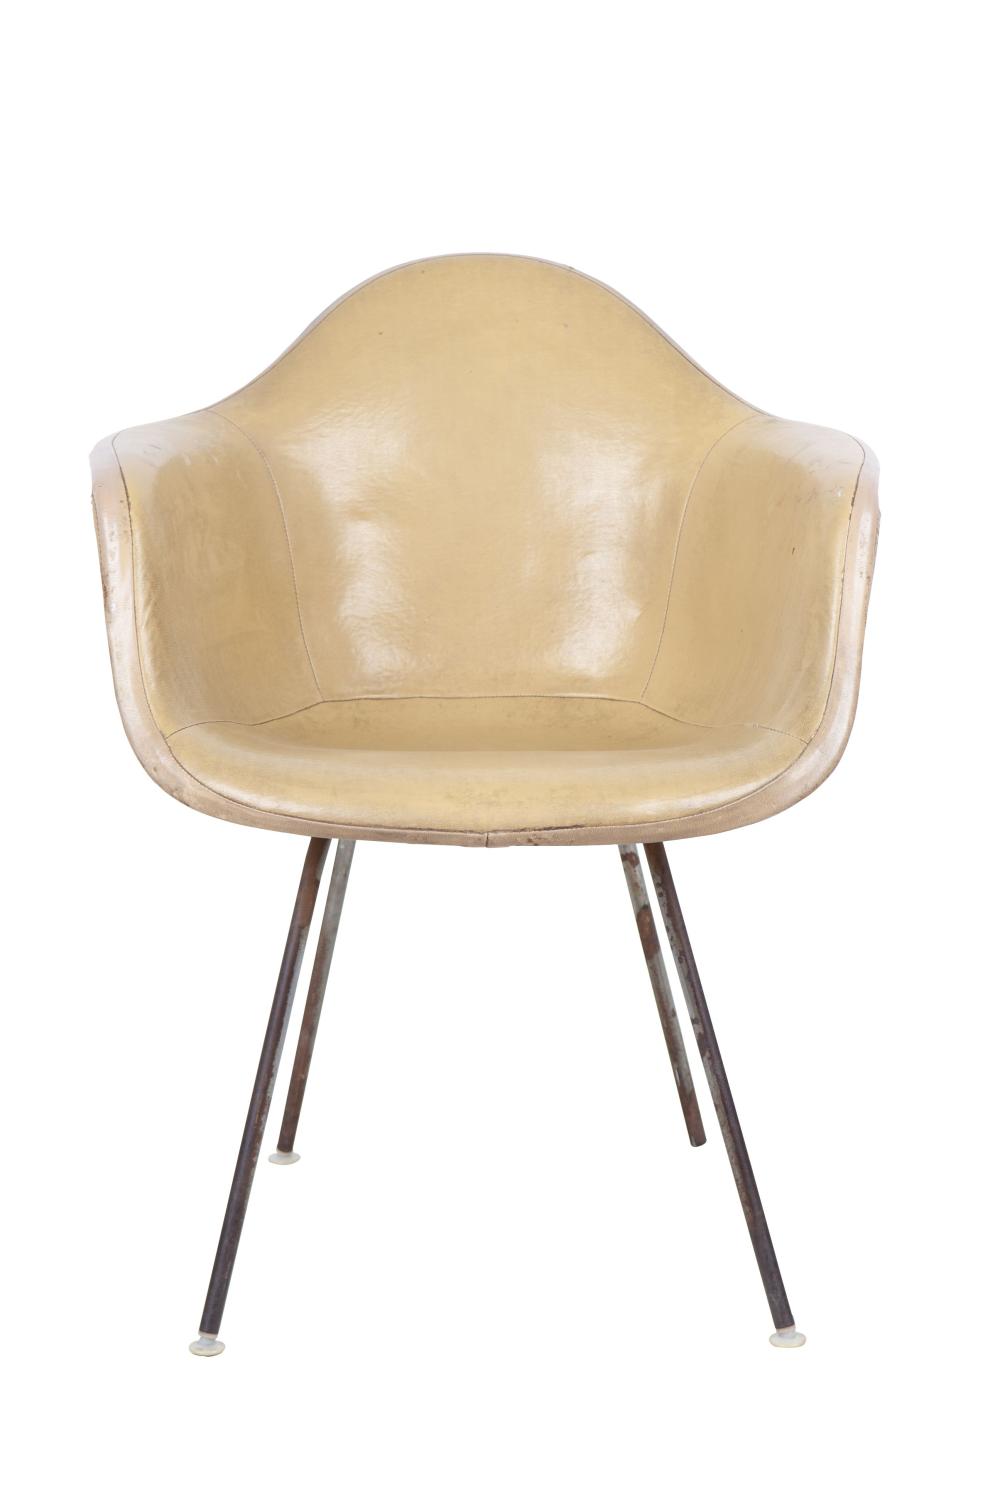 EAMES STYLE LEATHER WRAPPED FIBERGLASS 335c1d